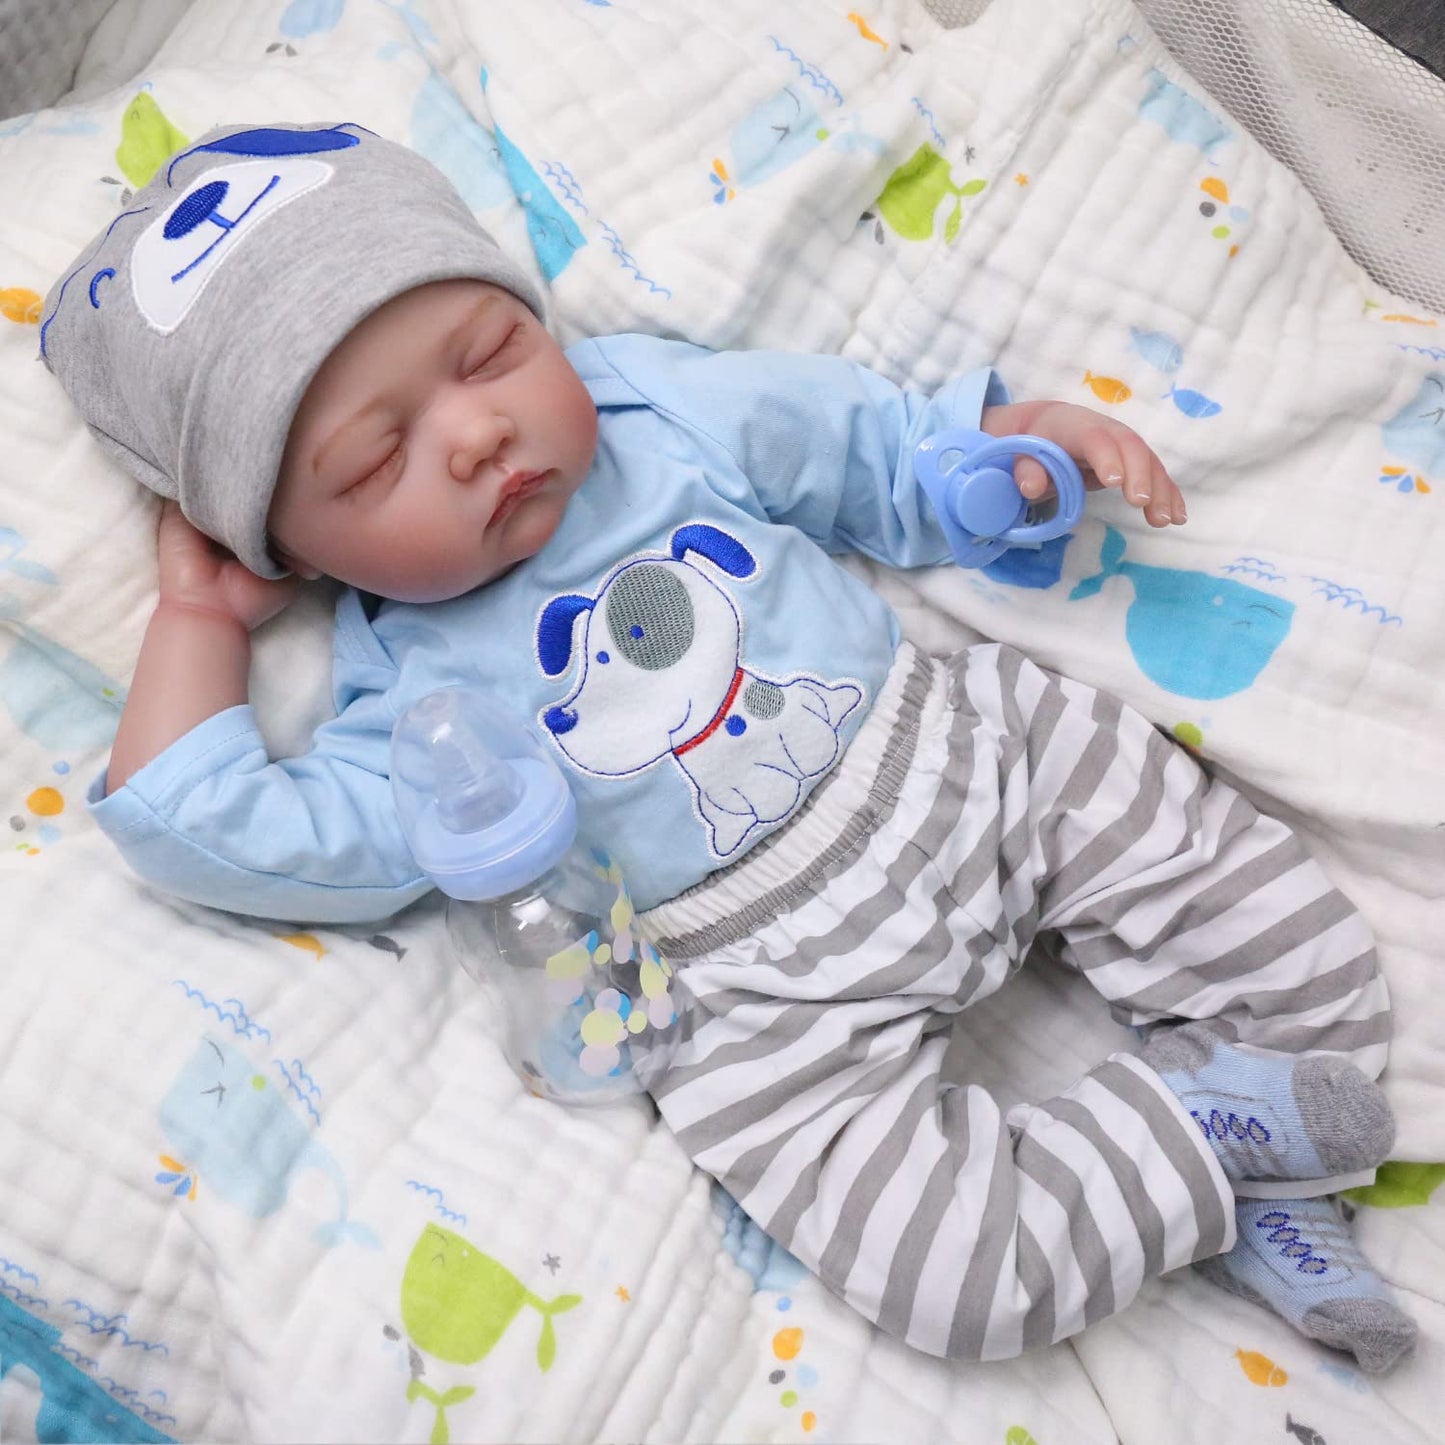 22 Inch Lifelike Newborn Baby Boy Doll, Weighted Realistic Reborn Toddler Dolls That Look Real, Amazing Gift Doll for Kids Age 3+